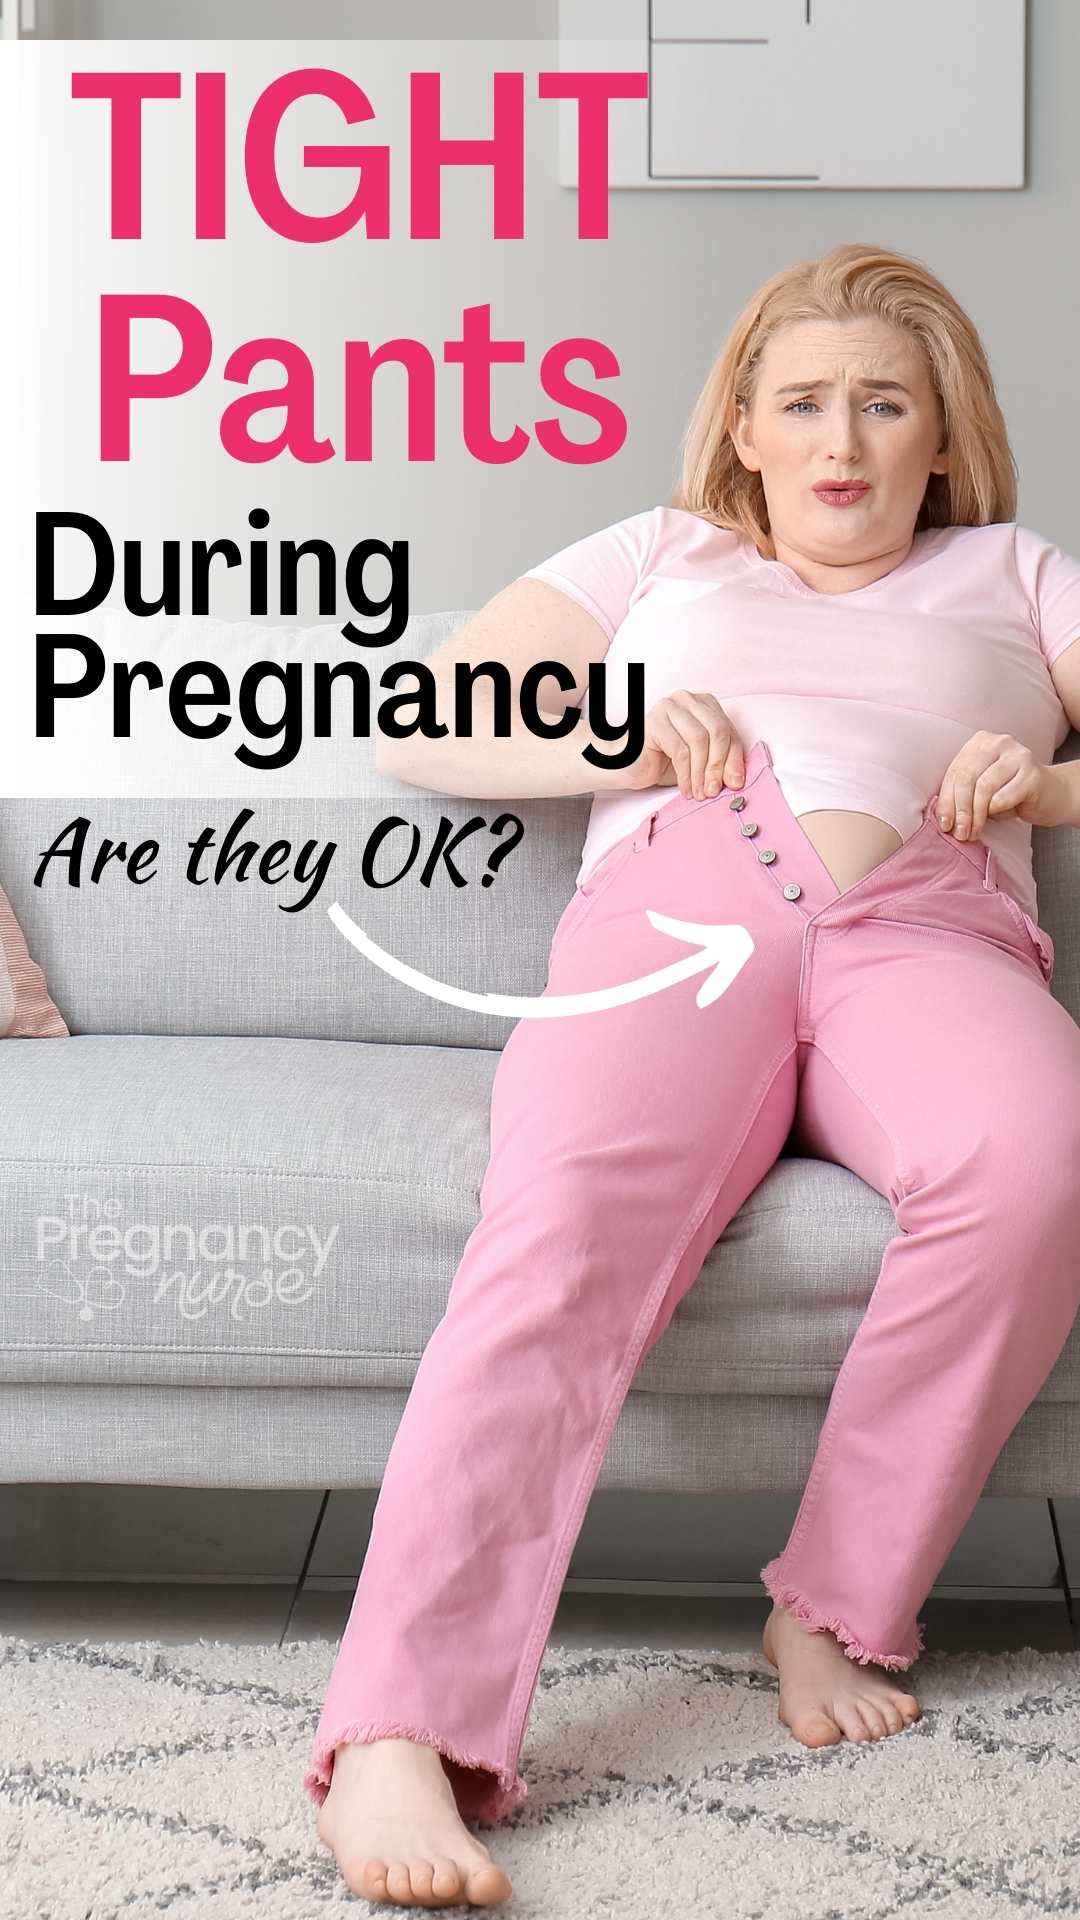 Pregnant women often find that their pants are tight around the waist. This can be uncomfortable and frustrating. In this blog post, we'll discuss some tips on how to make your pants more comfortable during pregnancy. Keep reading for more information.